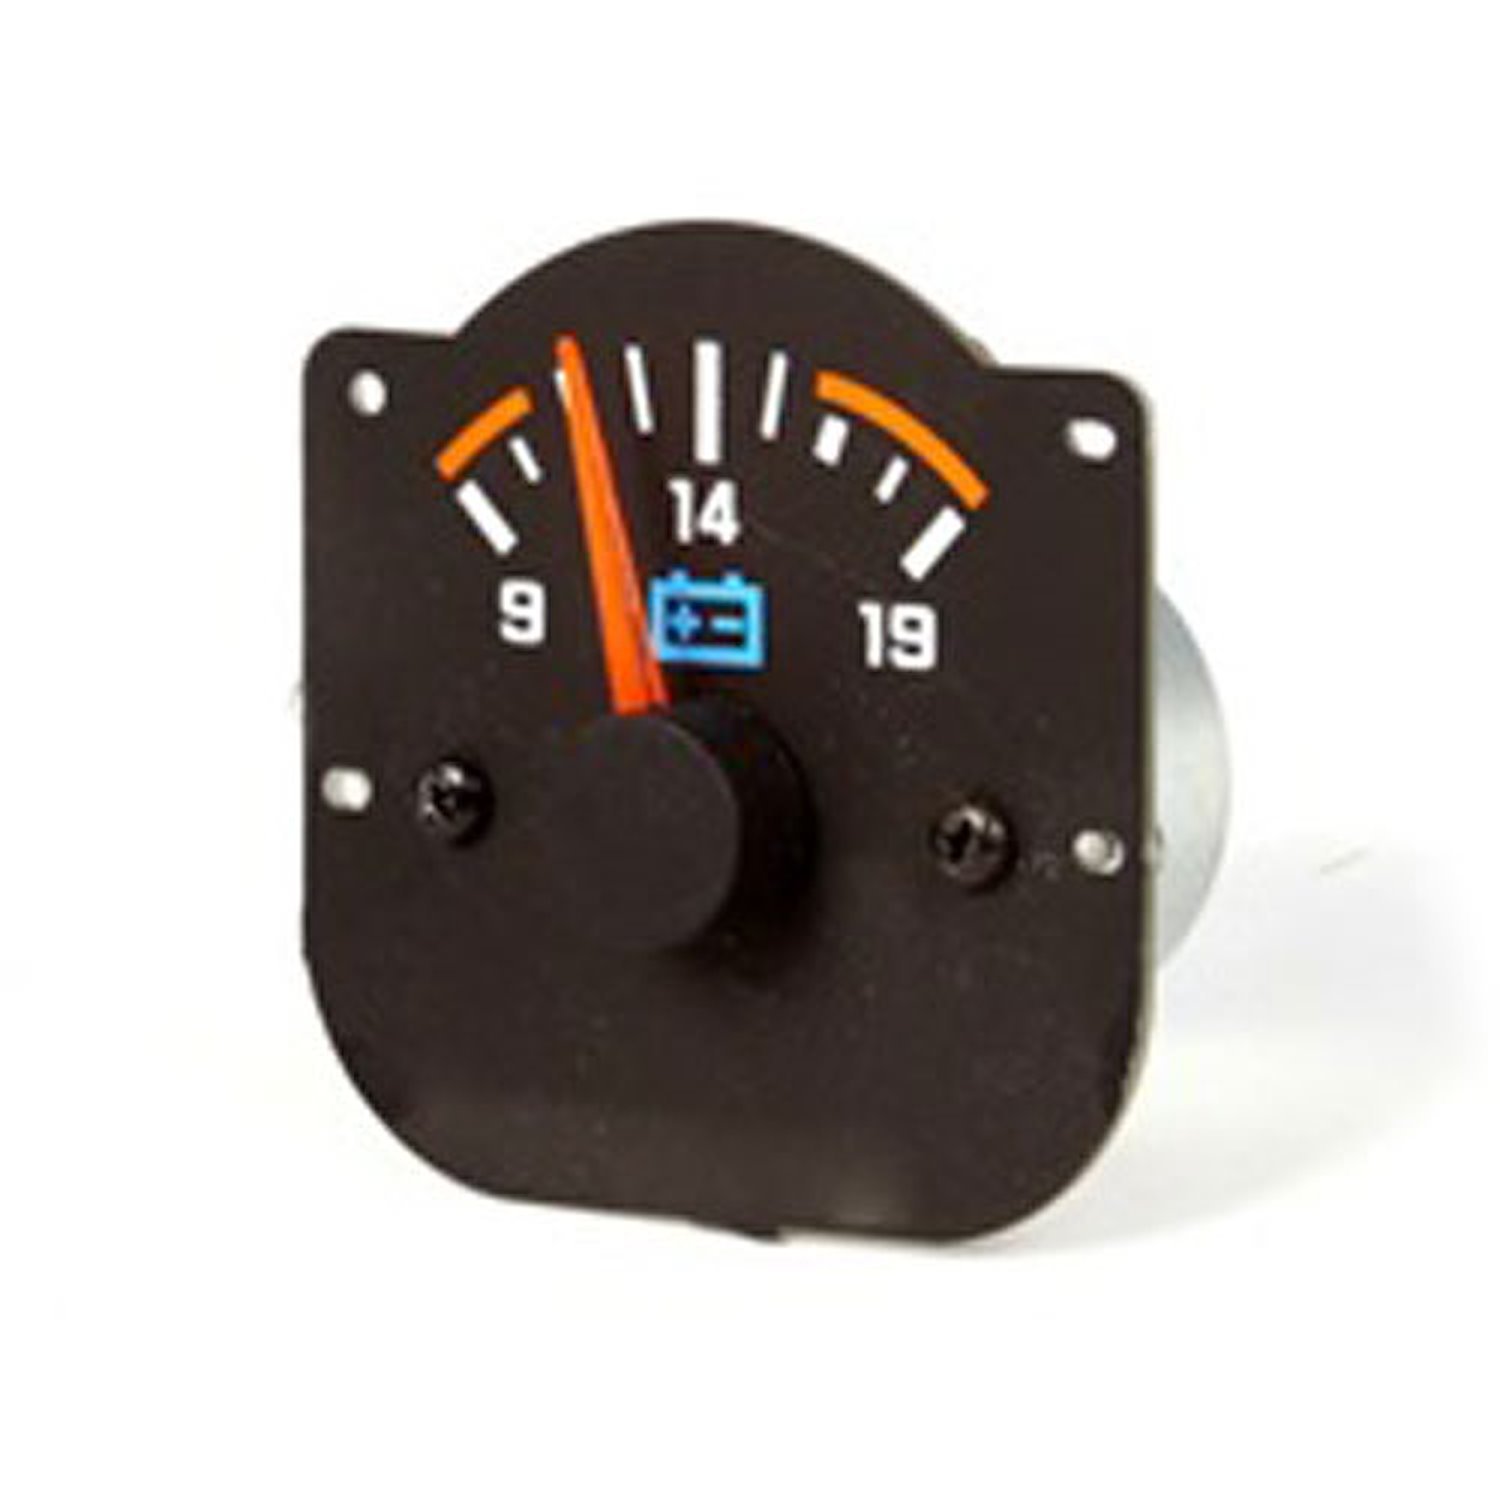 Replacement voltmeter gauge from Omix-ADA, Fits 92-95 Jeep Wranglers.